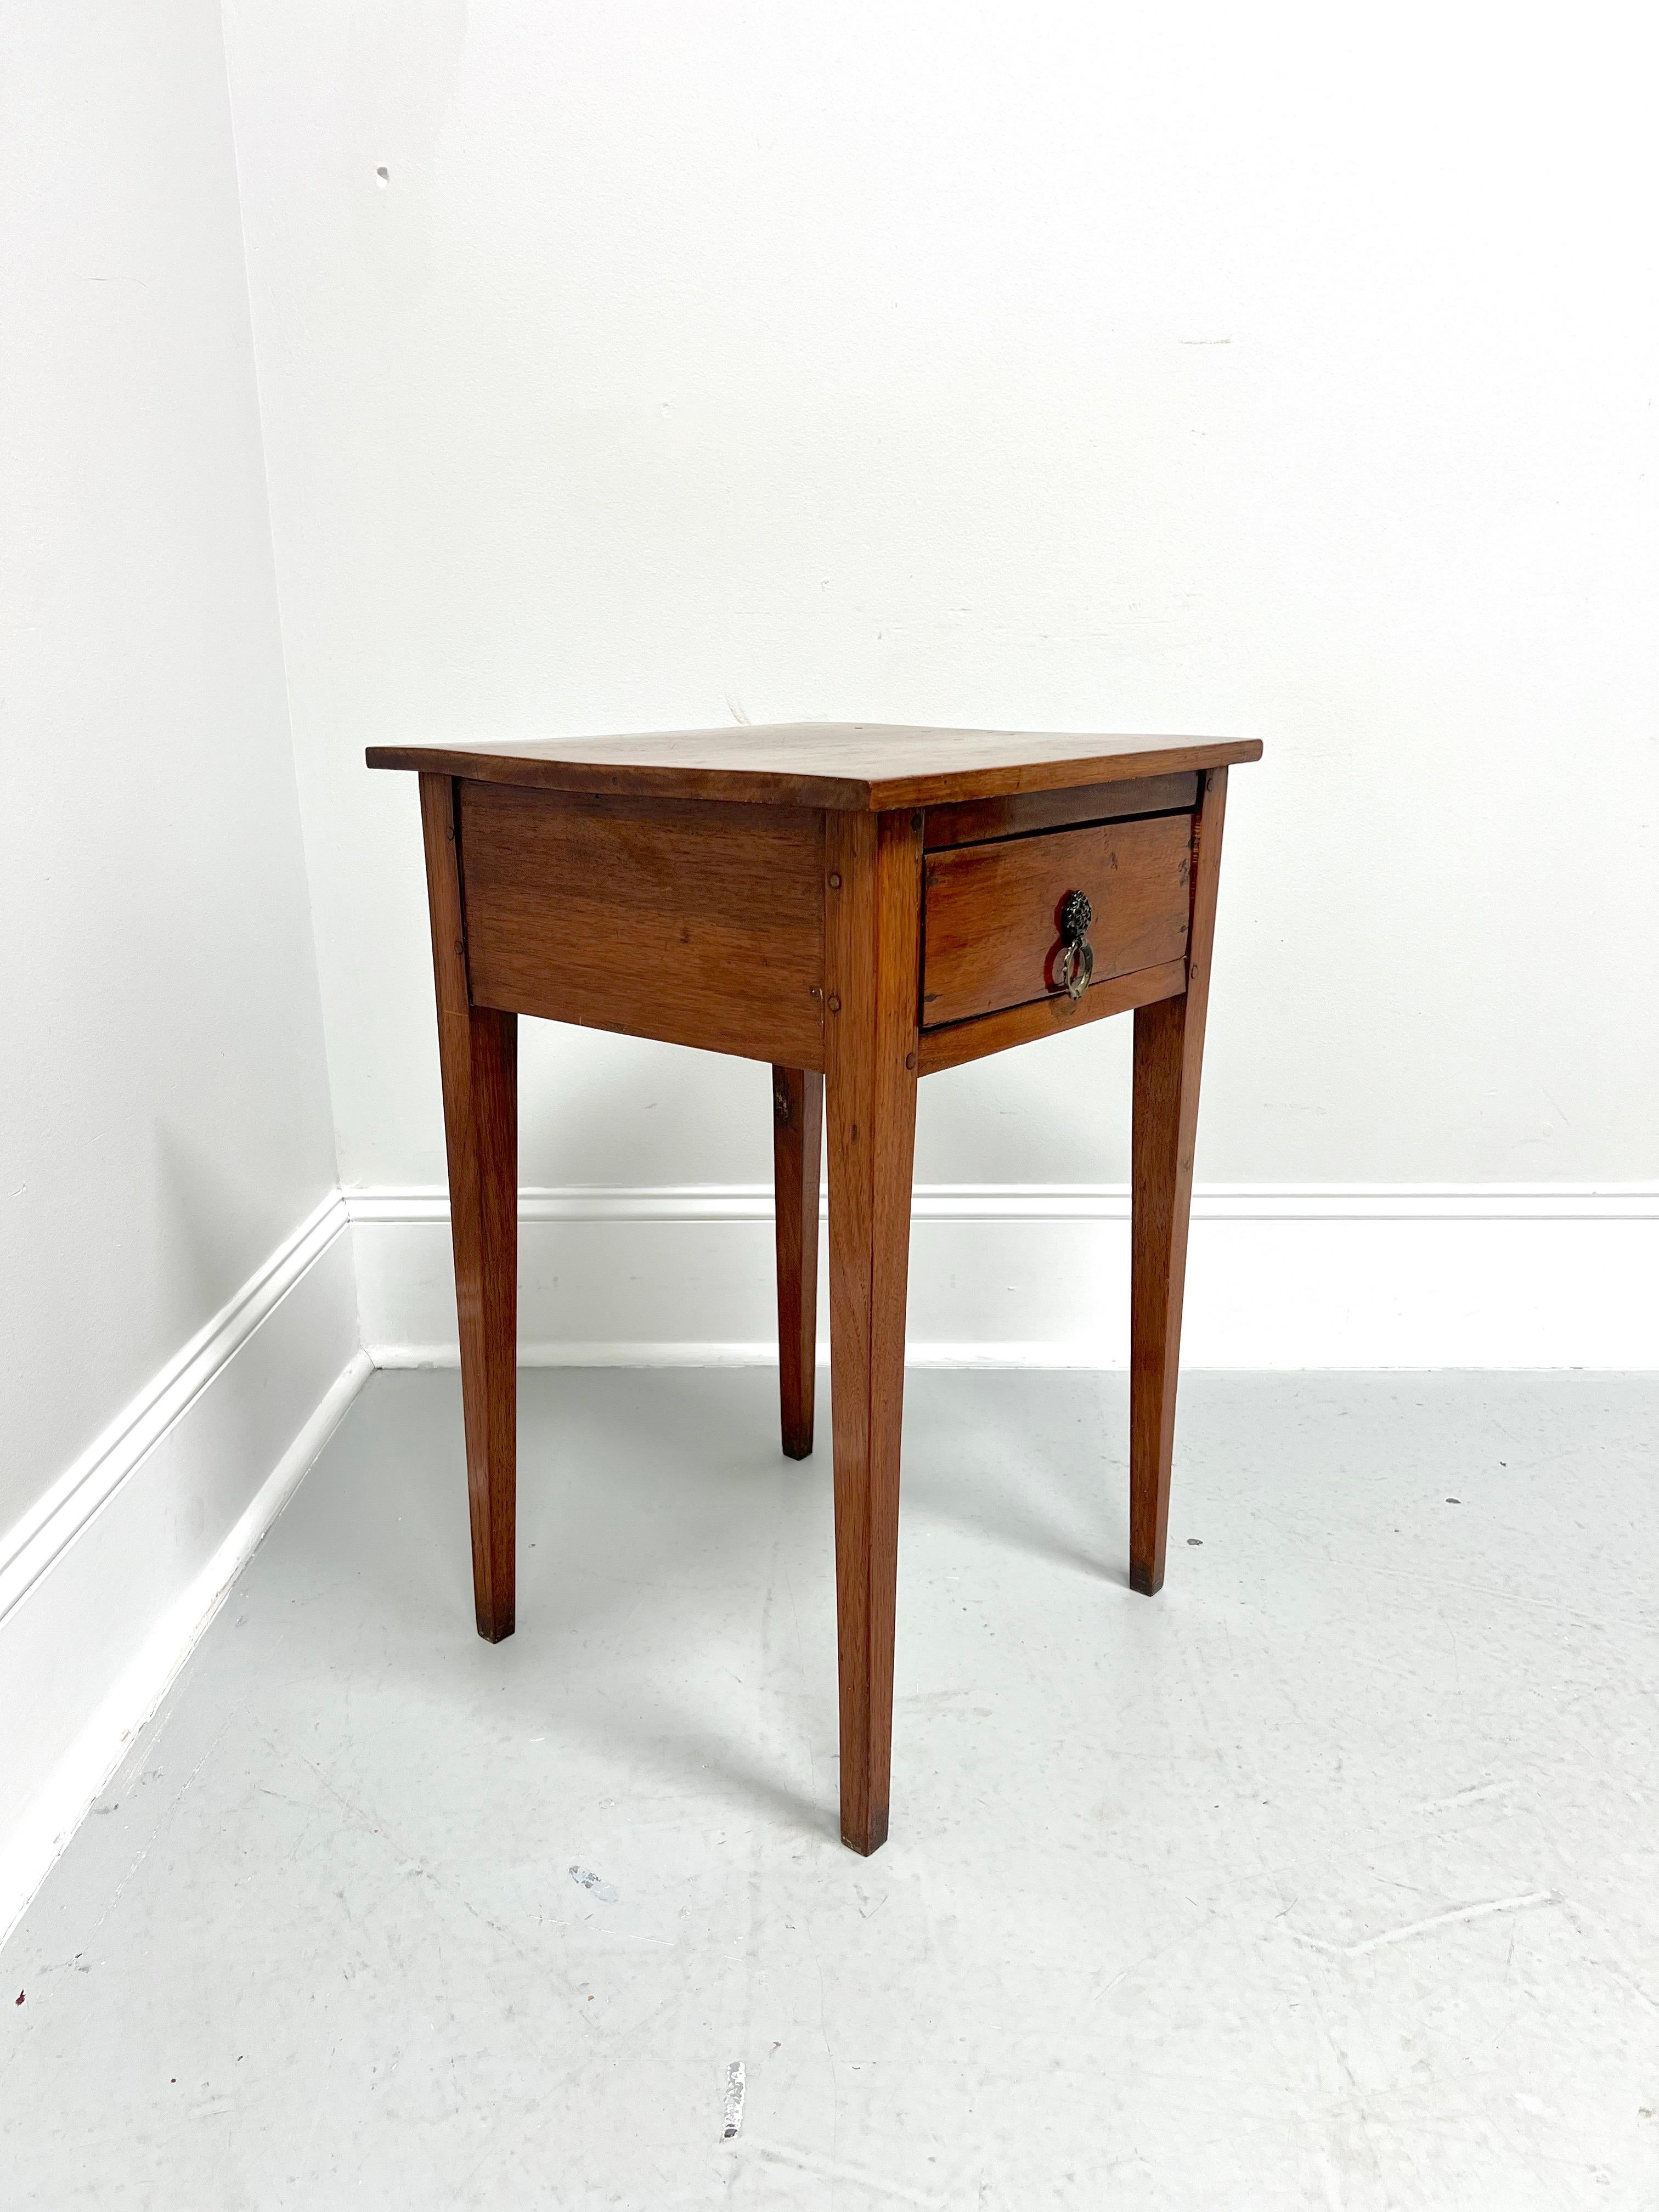 An antique 19th Century rustic side table, unbranded. Handcrafted of walnut, naturally distressed from age, squared edge to top, brass pull hardware, and tapered straight legs. Features one drawer of rabbet joint construction. Likely made in the